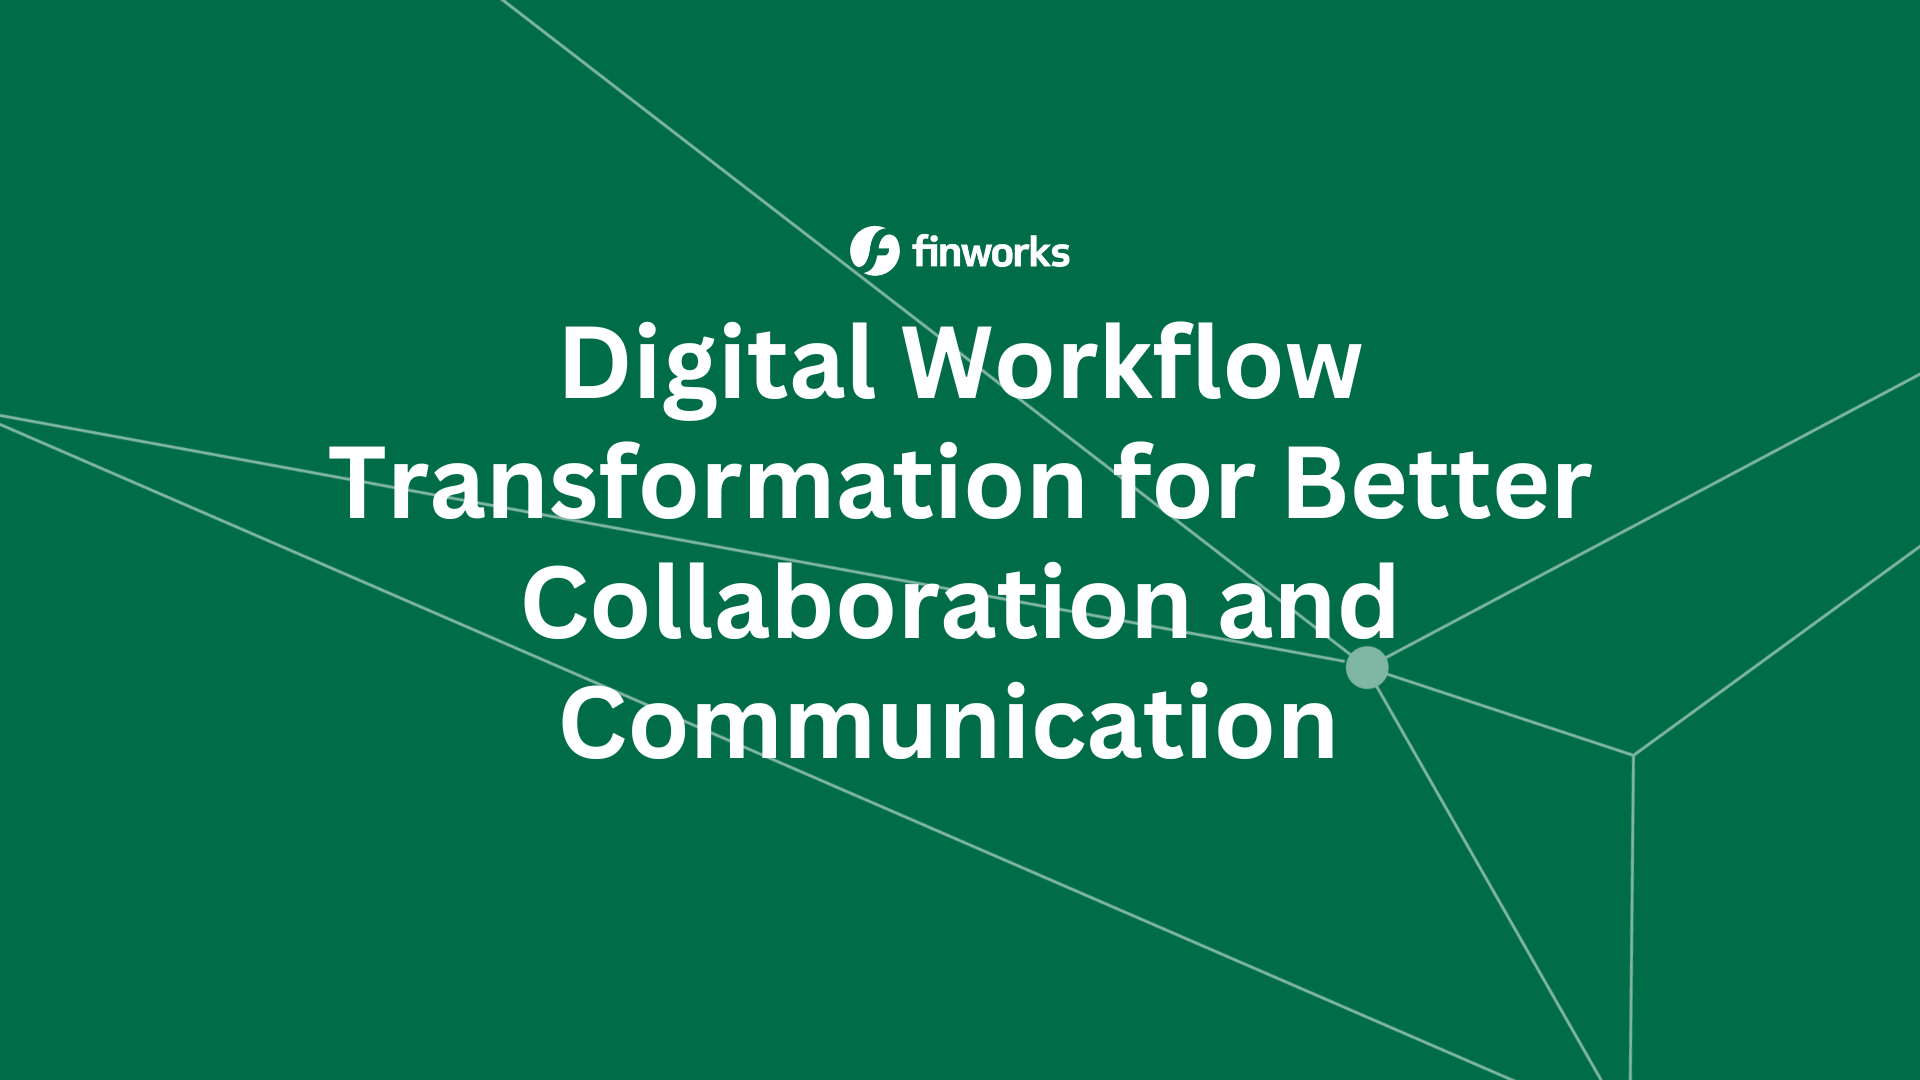 Digital Workflow Transformation for Better Collaboration and Communication 